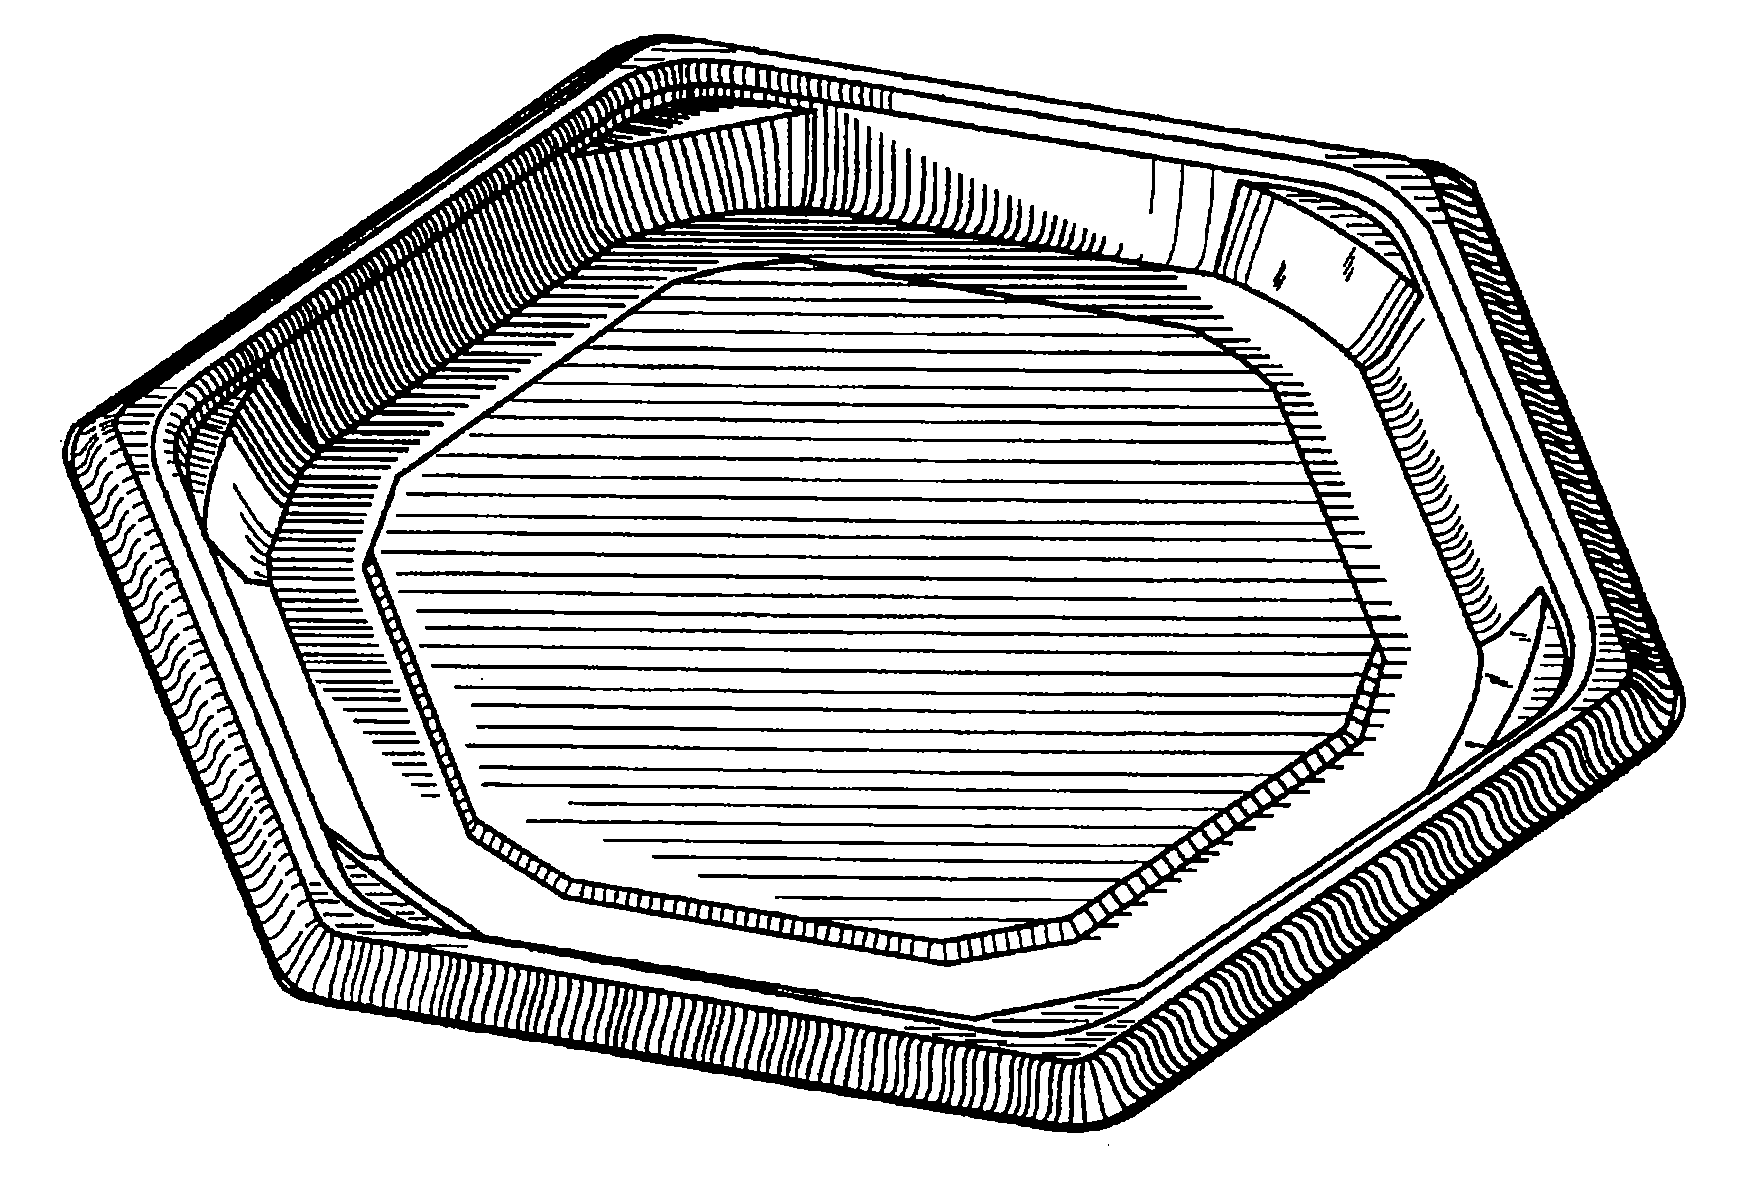 Example of a design for a tray with three or more repeatsabout axis.  
